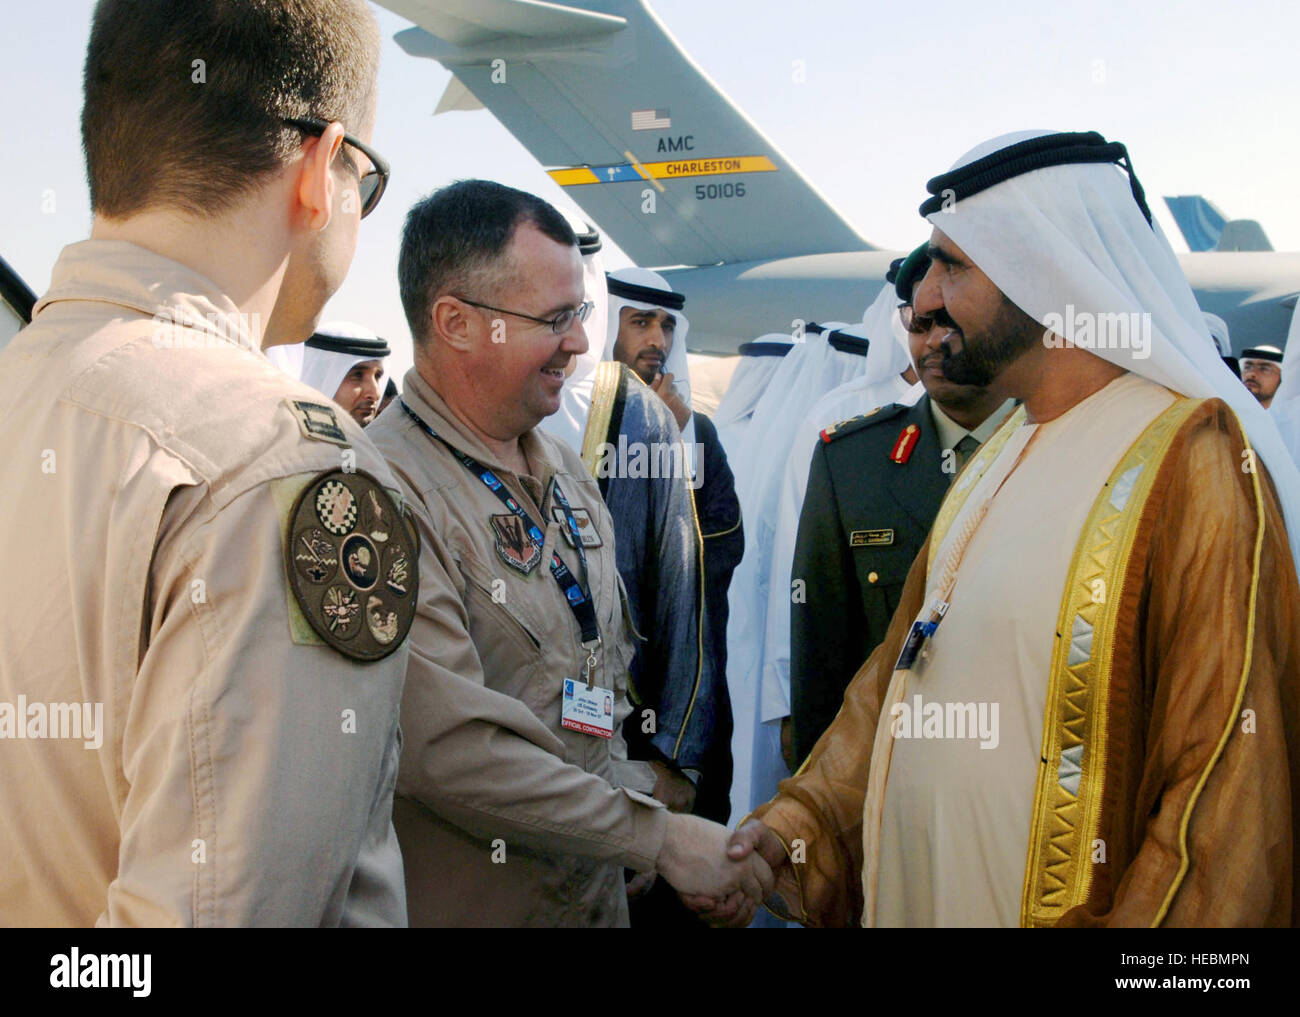 His Highness Shaikh Mohmmed bin Rashid Al Maktoum, vice president and prime minister of the United Arab Emirates and ruler of Dubai, shakes hands with Lt. Col. John Ukleya and Capt. John Dress Nov. 11 at the Dubai Air Show. Colonel Ukleya and Captain Dress are E-3 Sentry AWACS aircrew member with the 552 Air Control Wing from Tinker Air Force Base, Okla. The United States military provided support for the 10th annual Dubai Air Show Nov. 11 to 15. Approximately 300 Airman, Soldiers and Sailors, and various Air Force and Navy aircraft from bases in the Persian Gulf region and the United States e Stock Photo